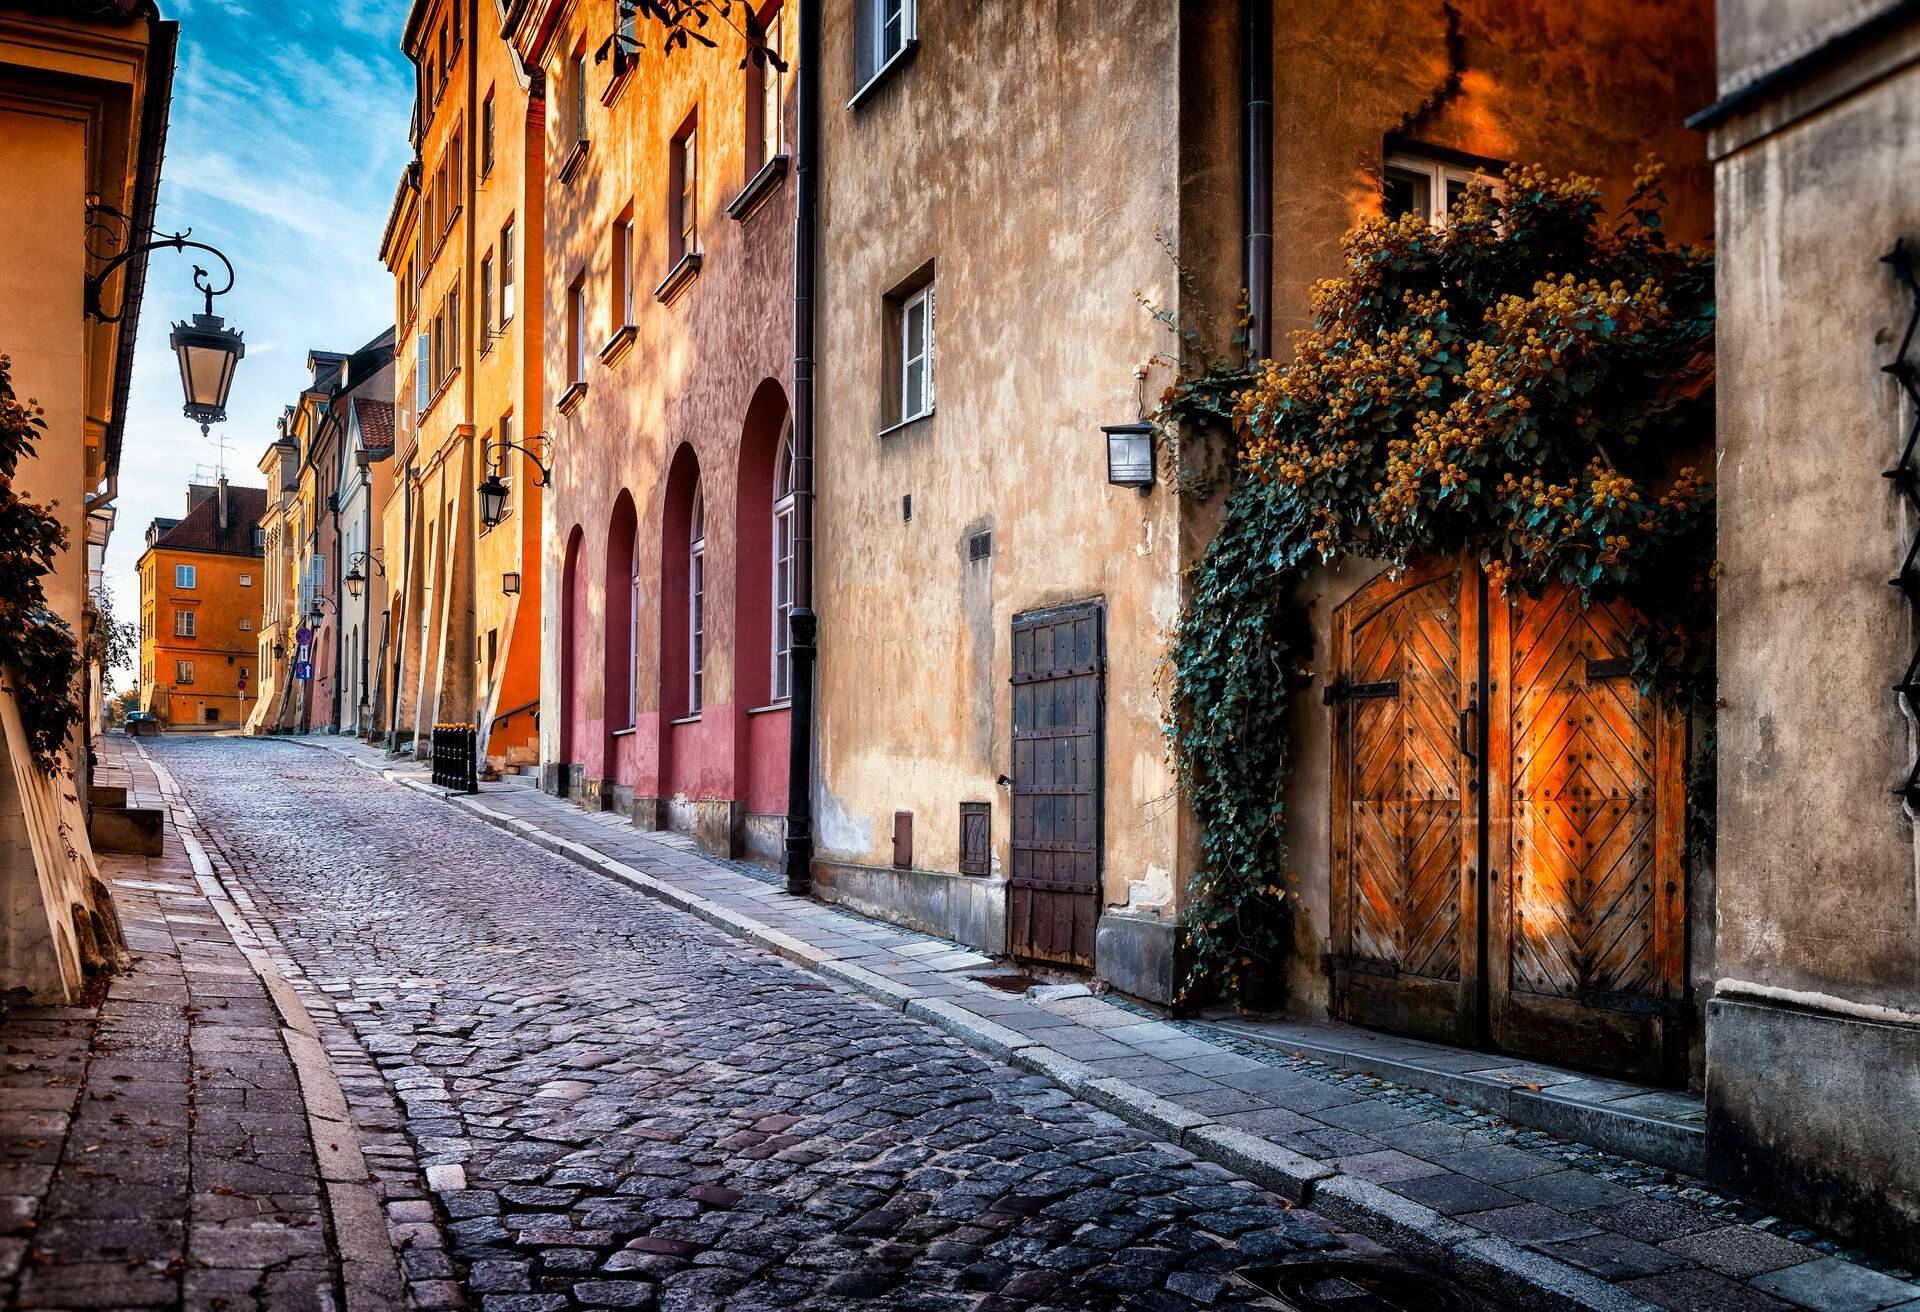 A narrow paved lane between old buildings in an old town.